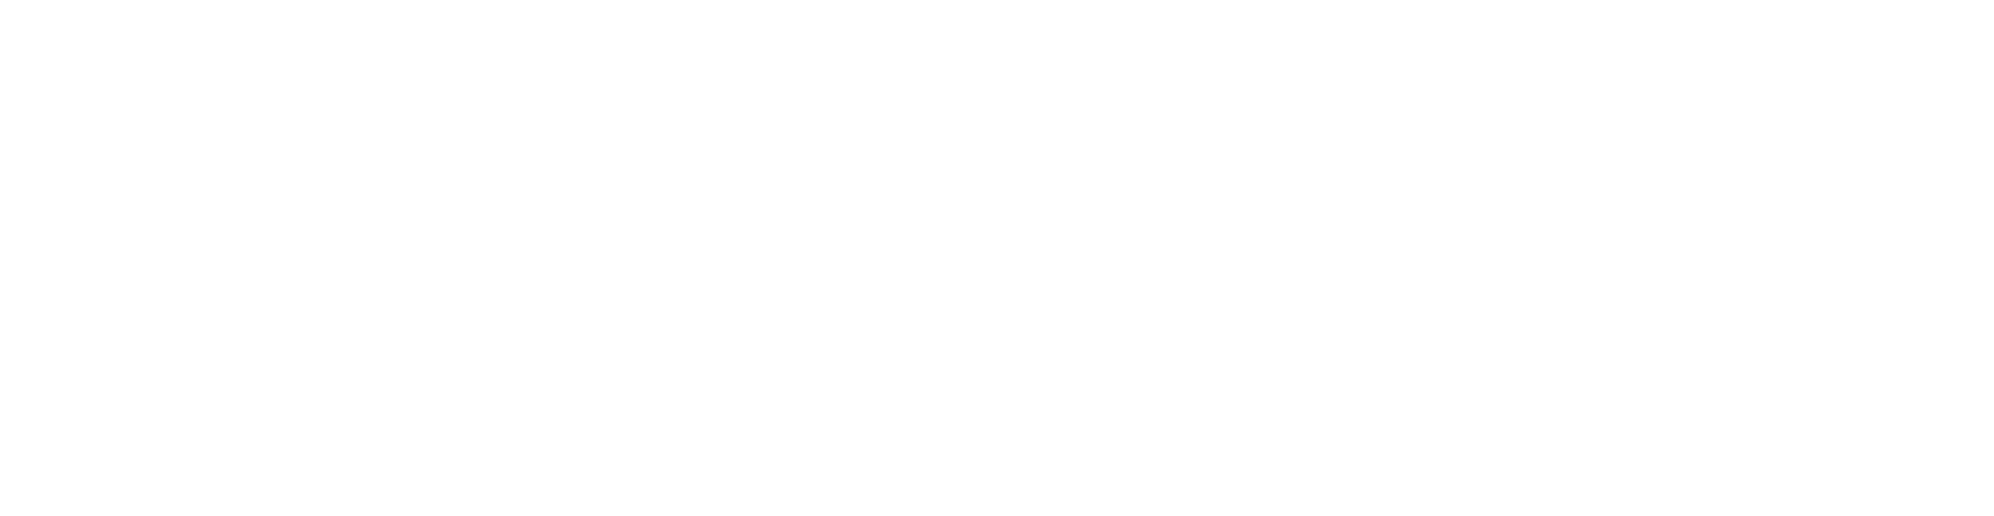 Powered by Solera